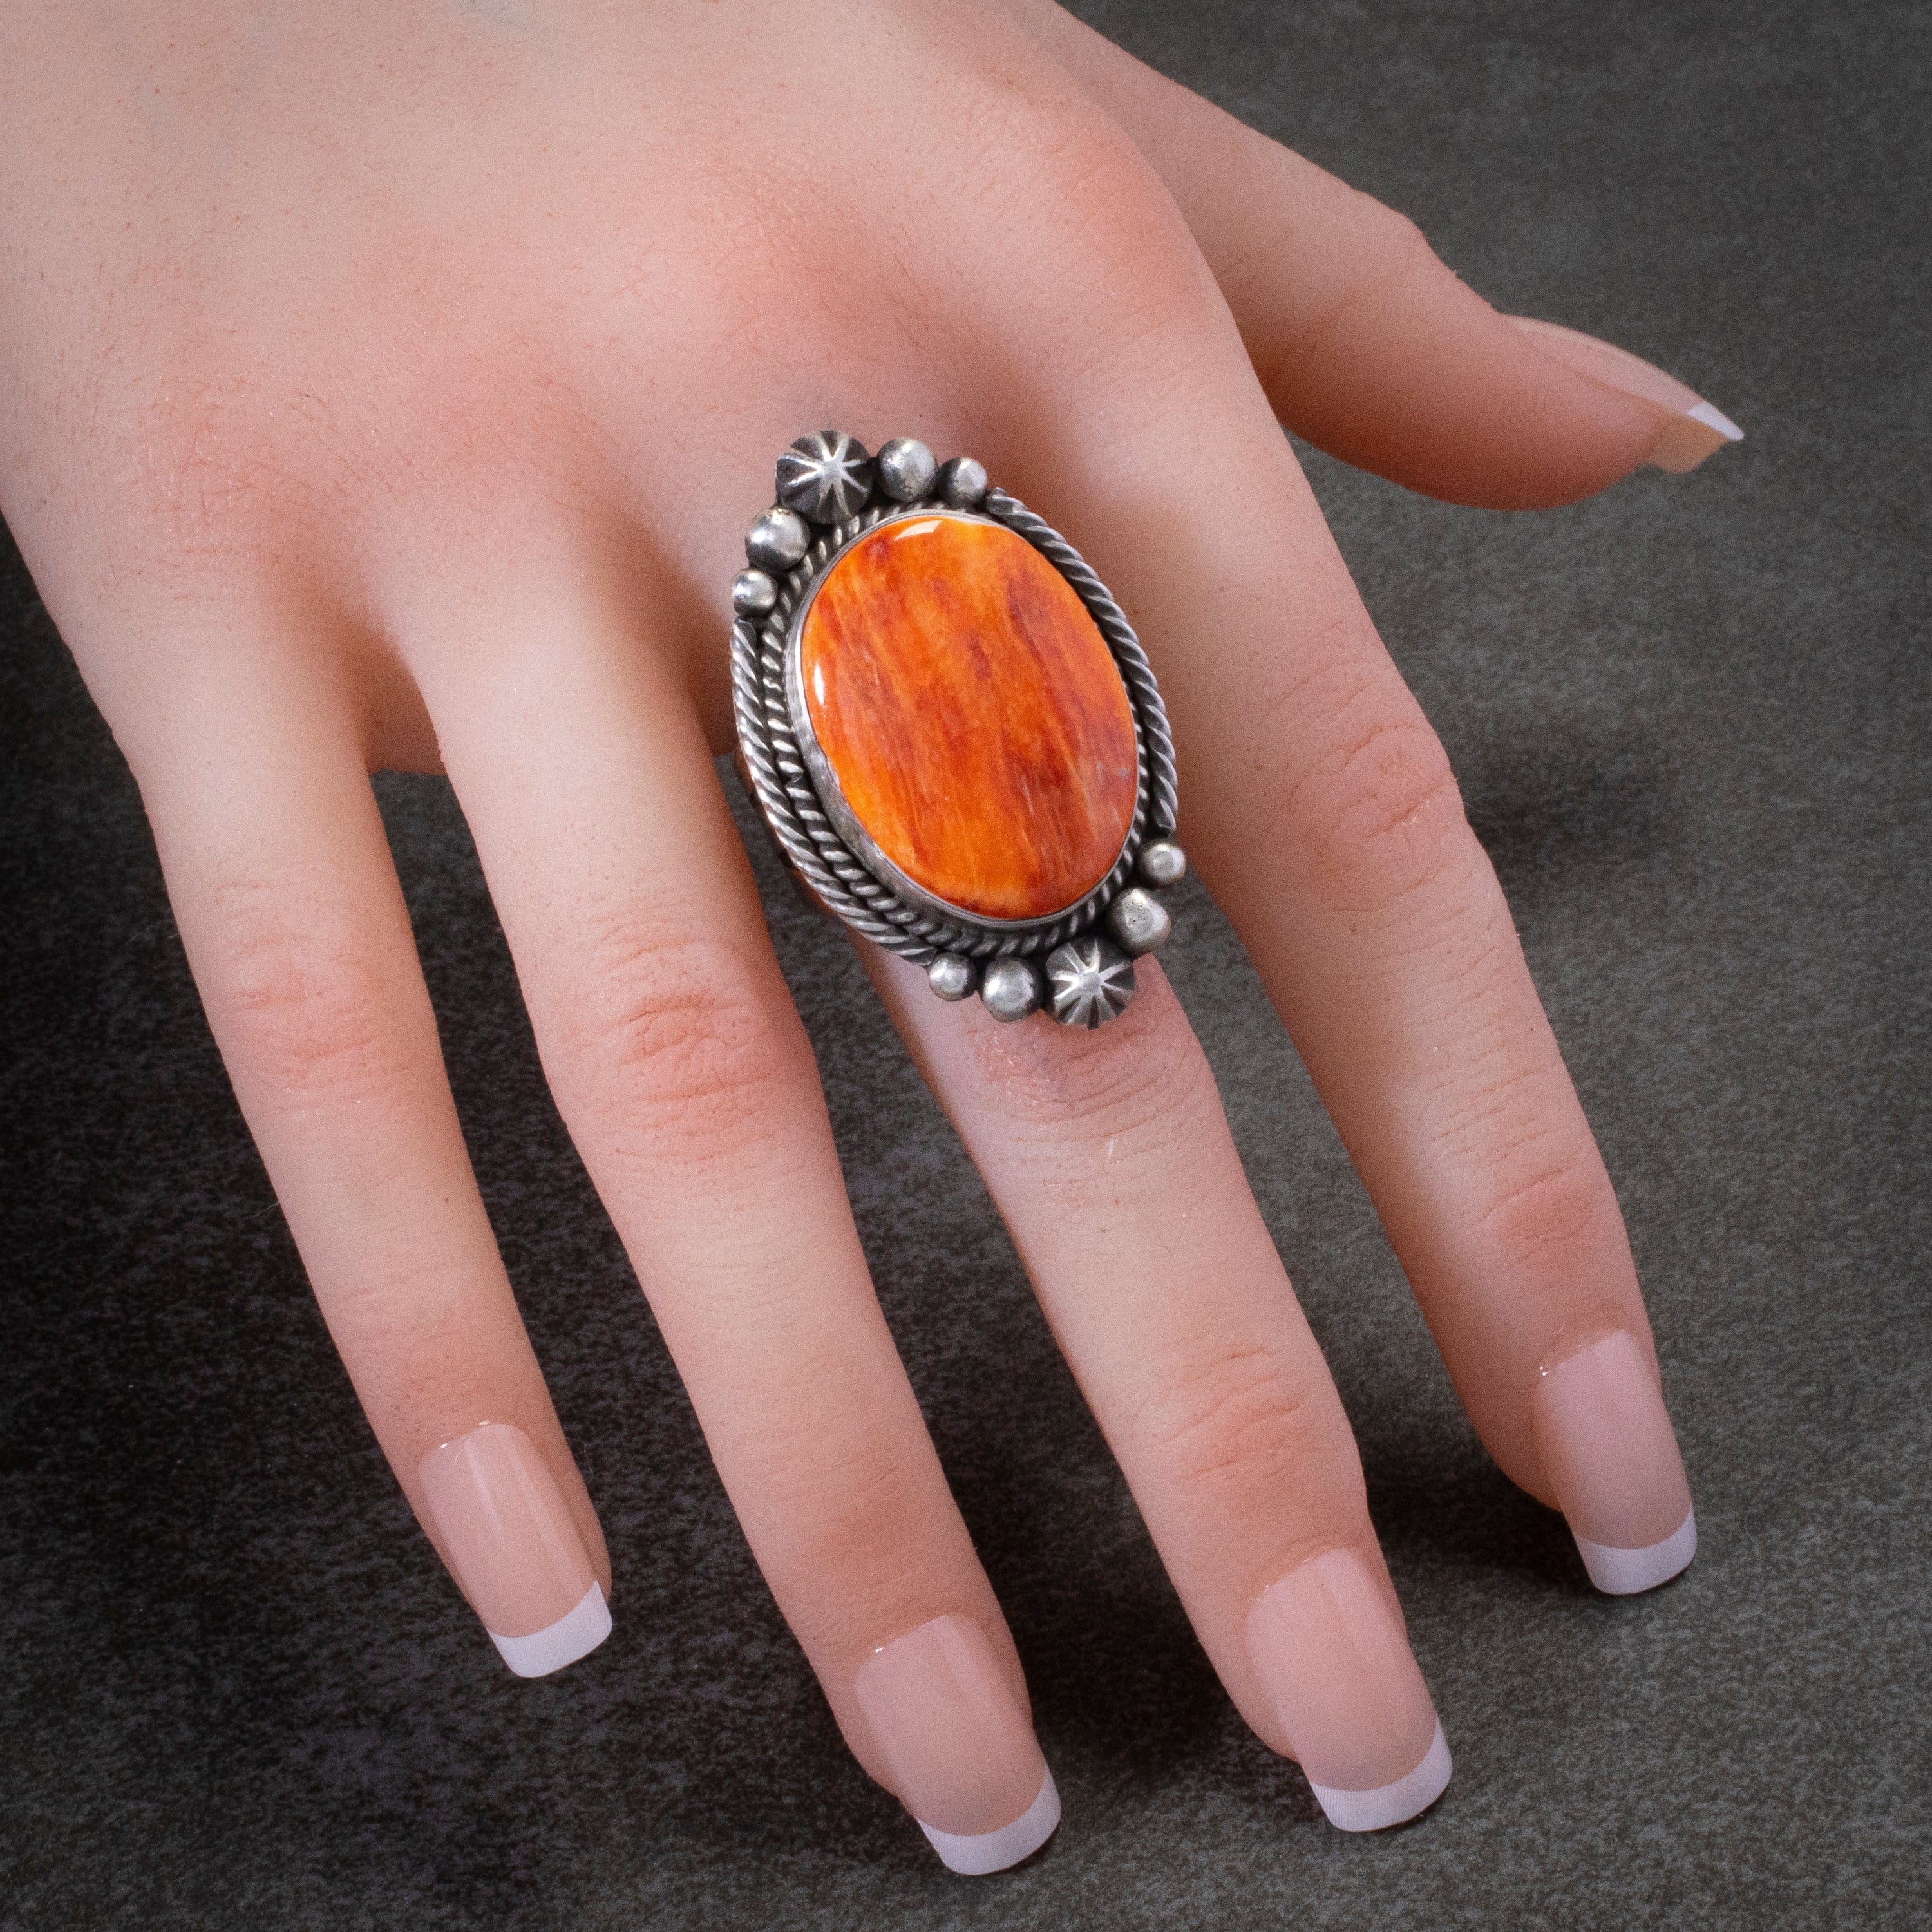 Kalifano Native American Jewelry 8 Randall Enditto Navajo Orange Spiny Oyster Shell USA Native American Made 925 Sterling Silver Ring NAR1200.038.8